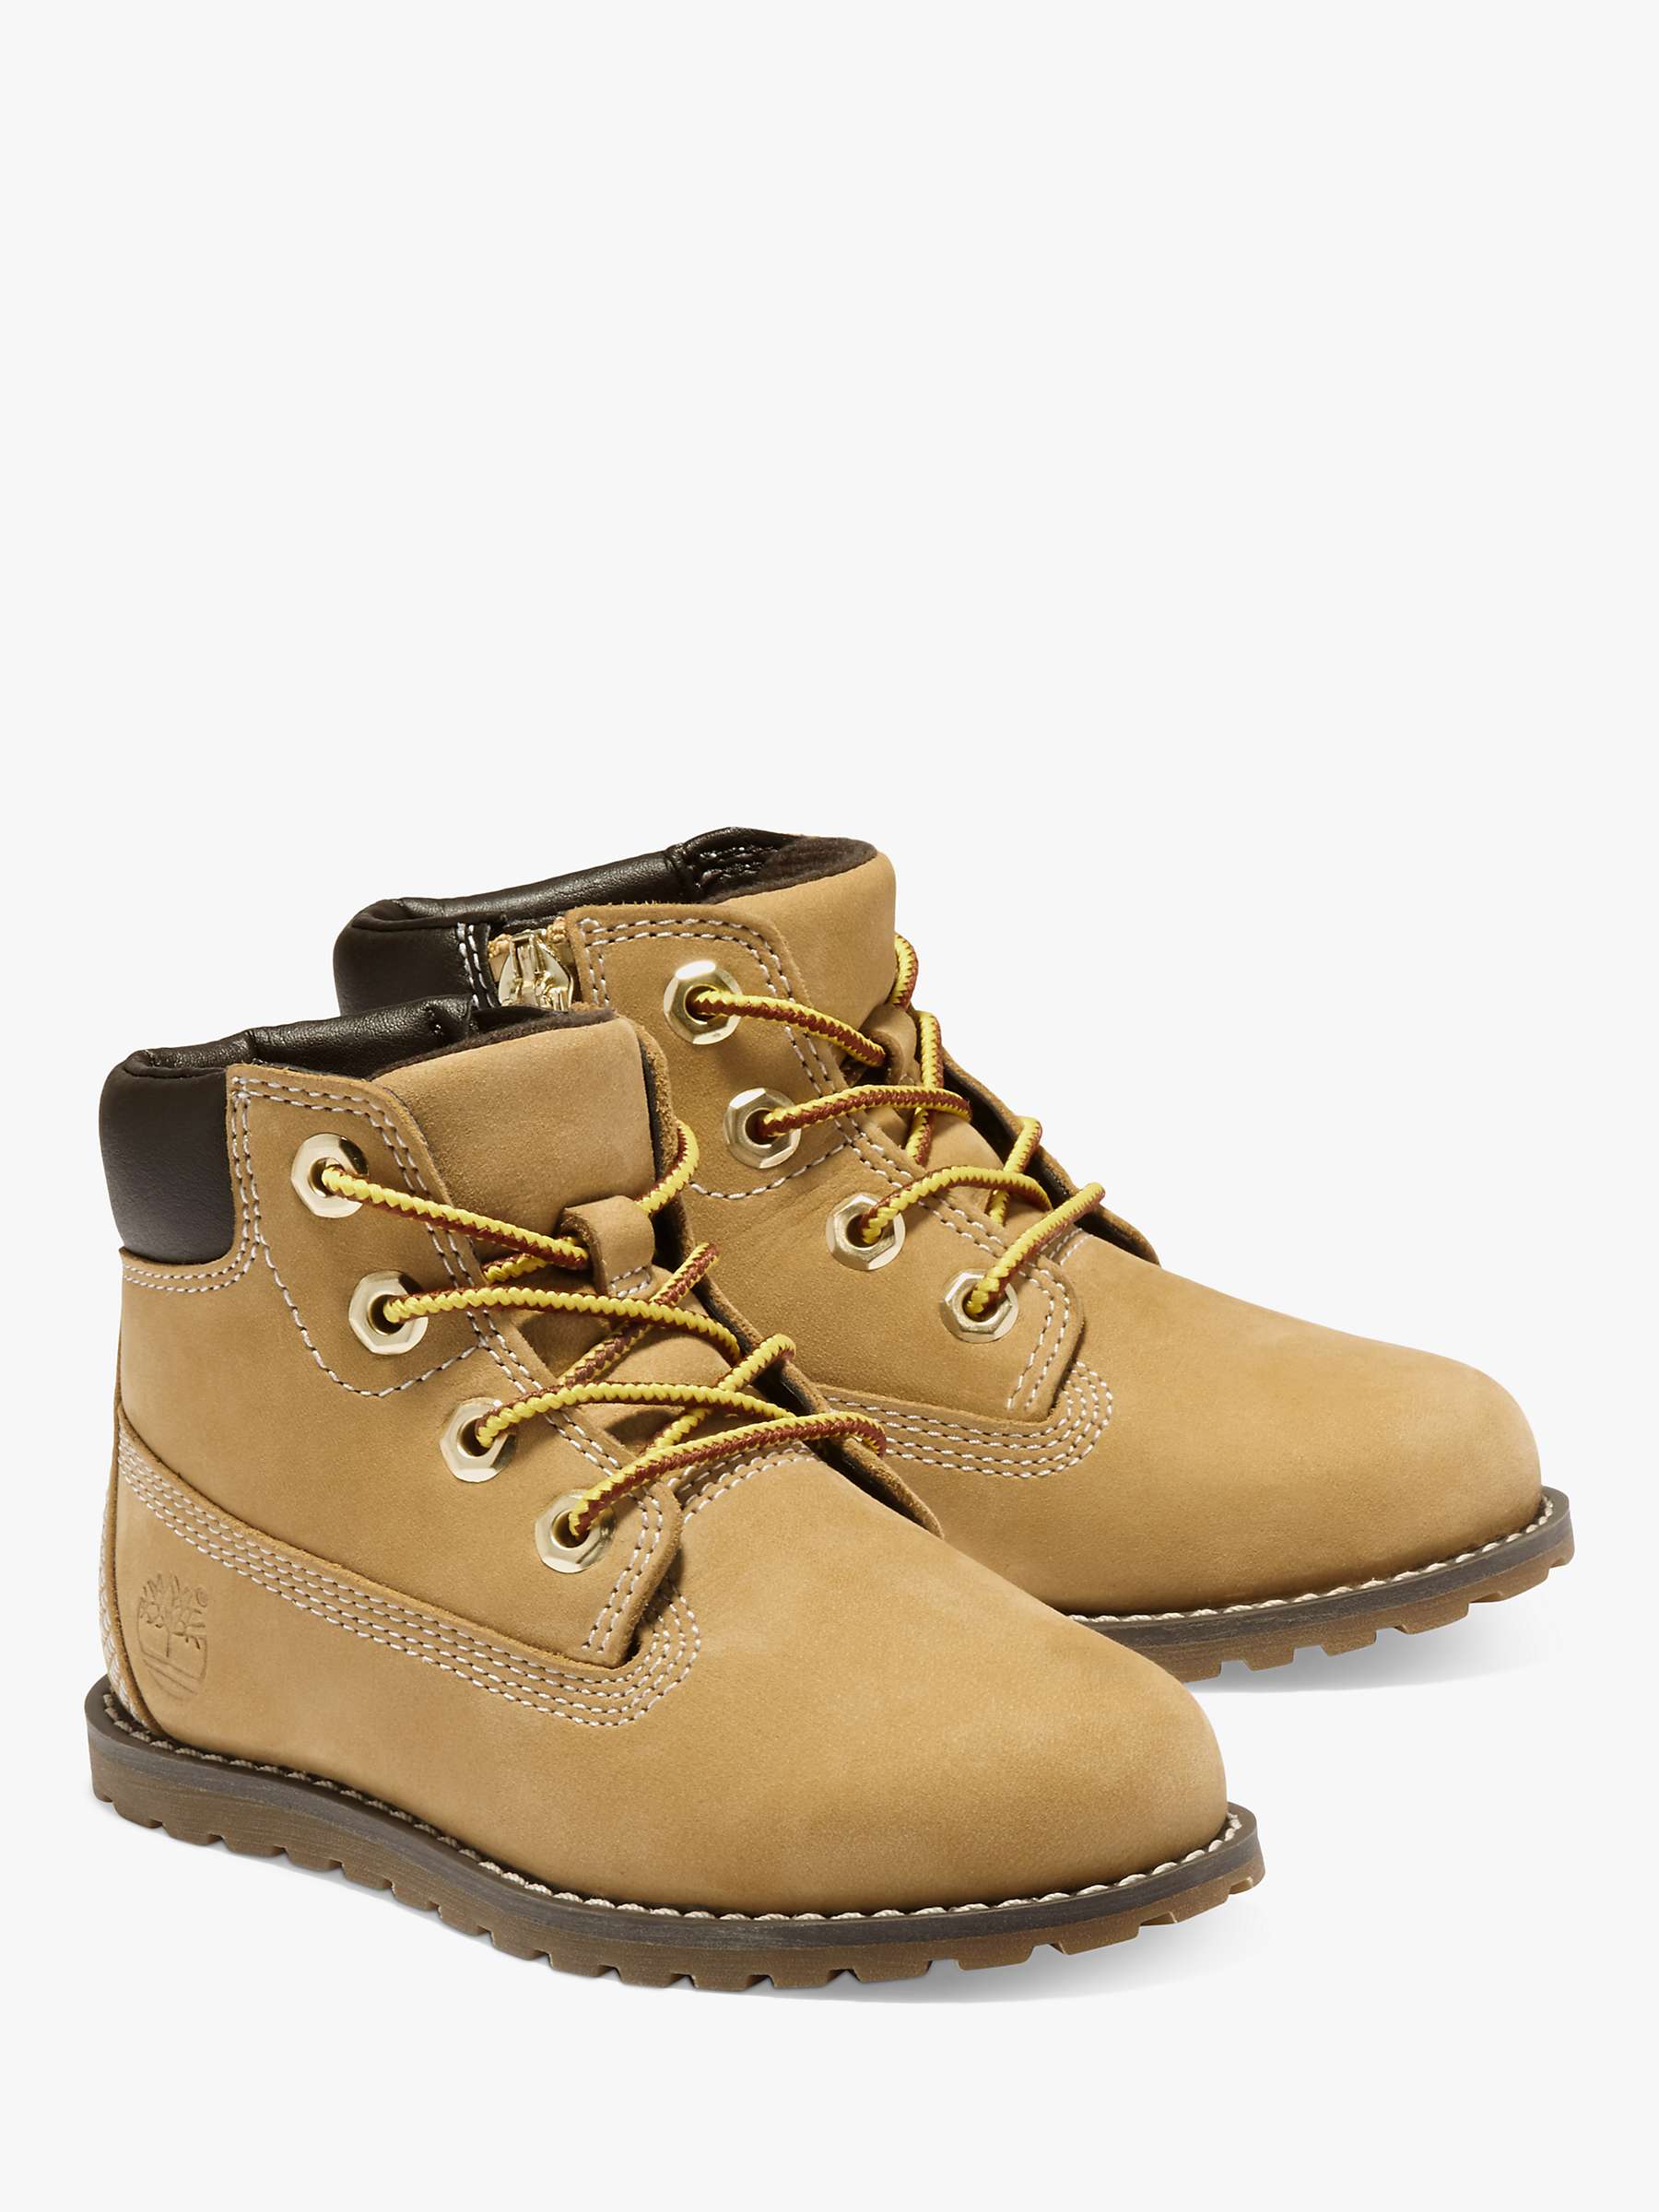 Buy Timberland Kids' Pokey Pine 6 Inch Boots Online at johnlewis.com